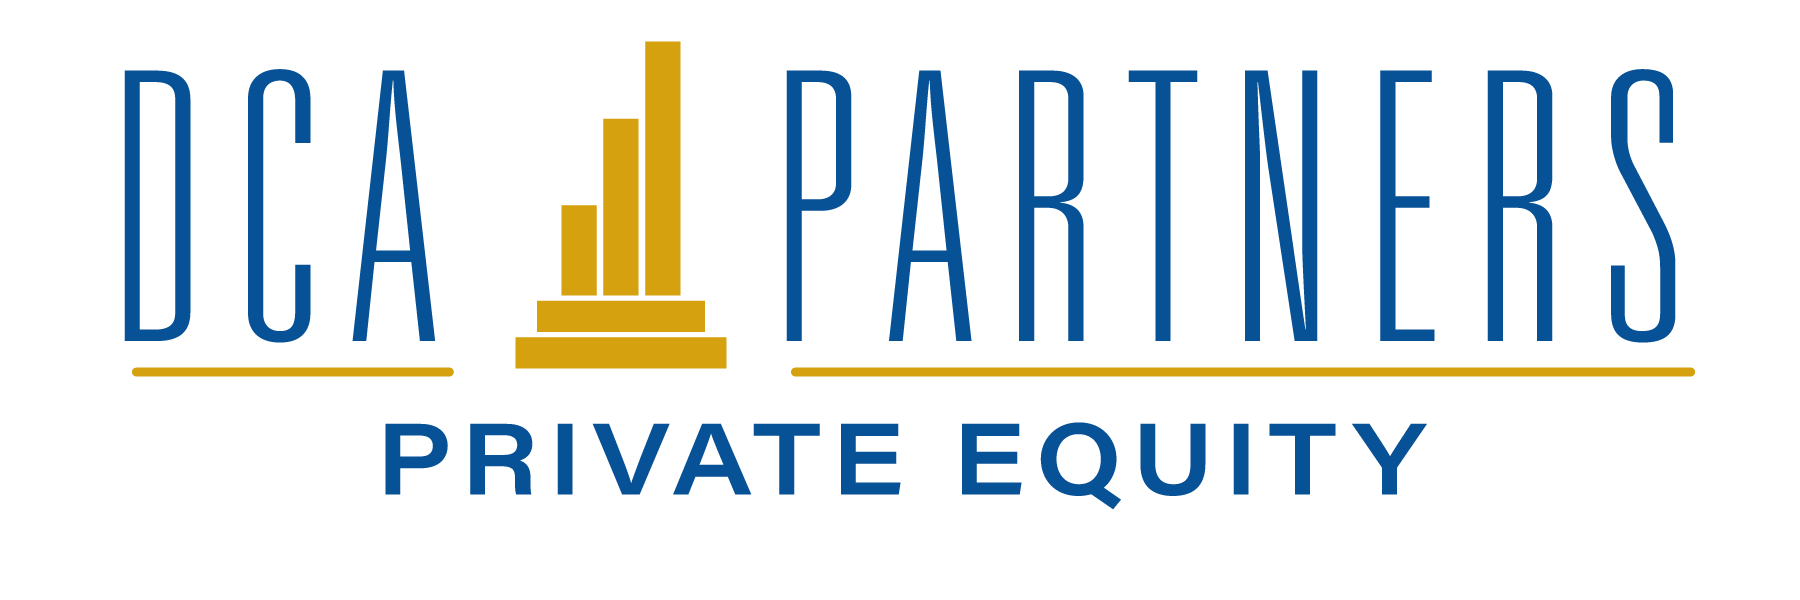 DCA Partners Private Equity